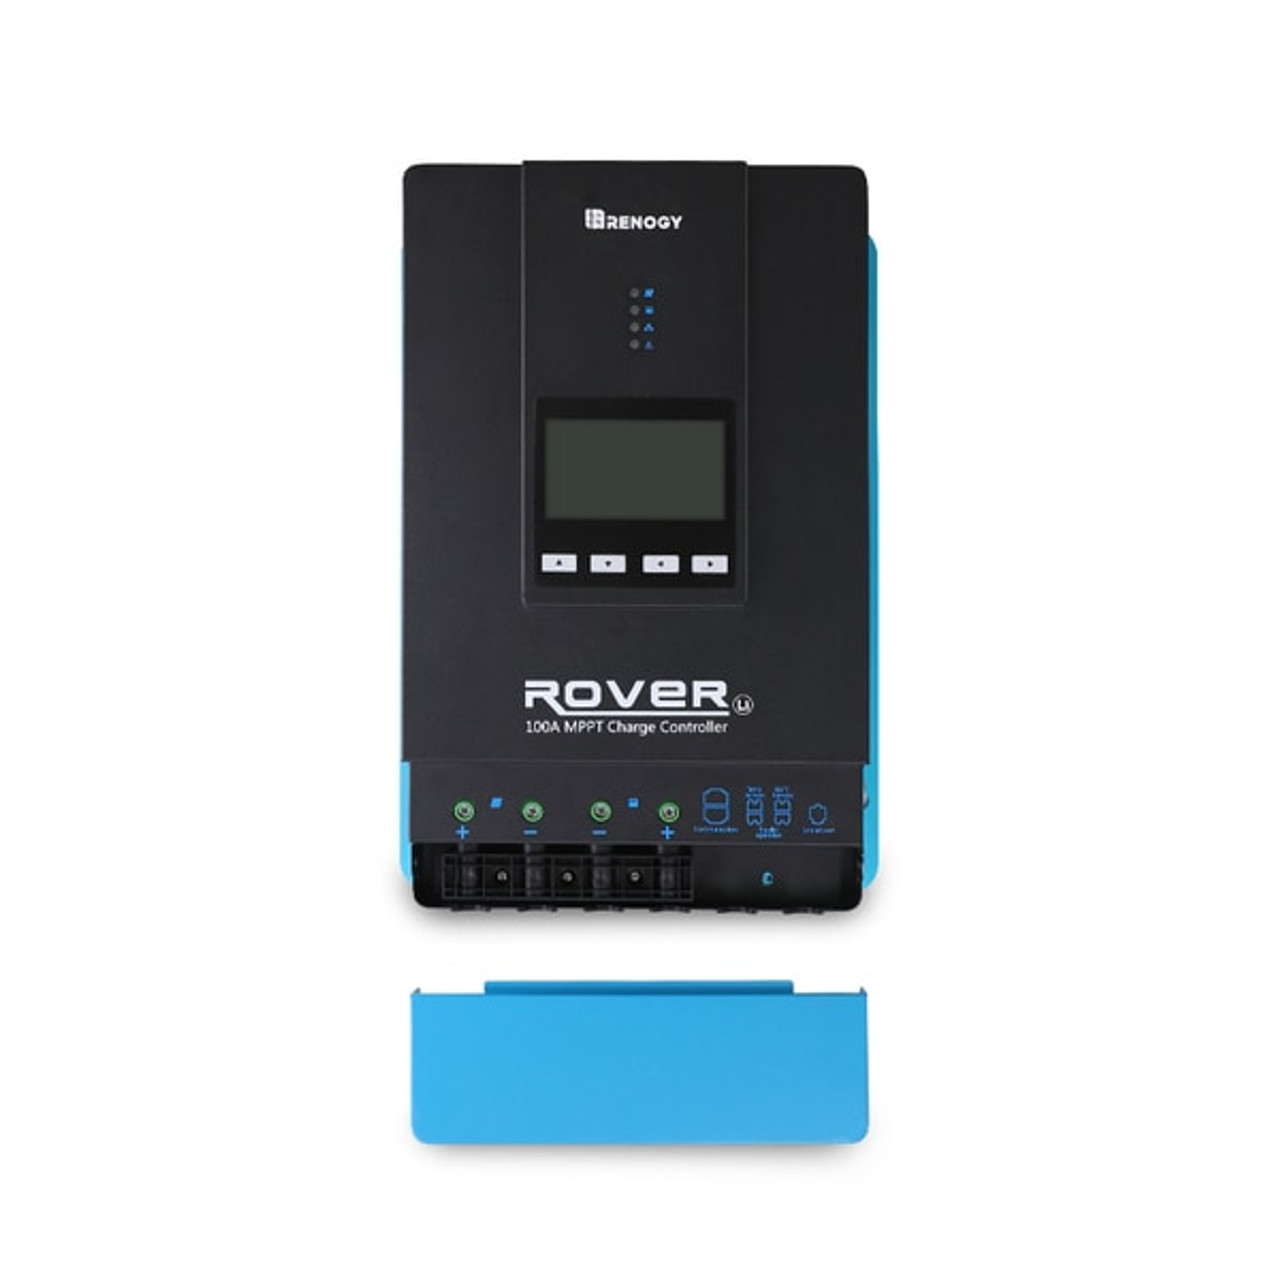 Rover Li 100 Amp MPPT Solar Charge Controller